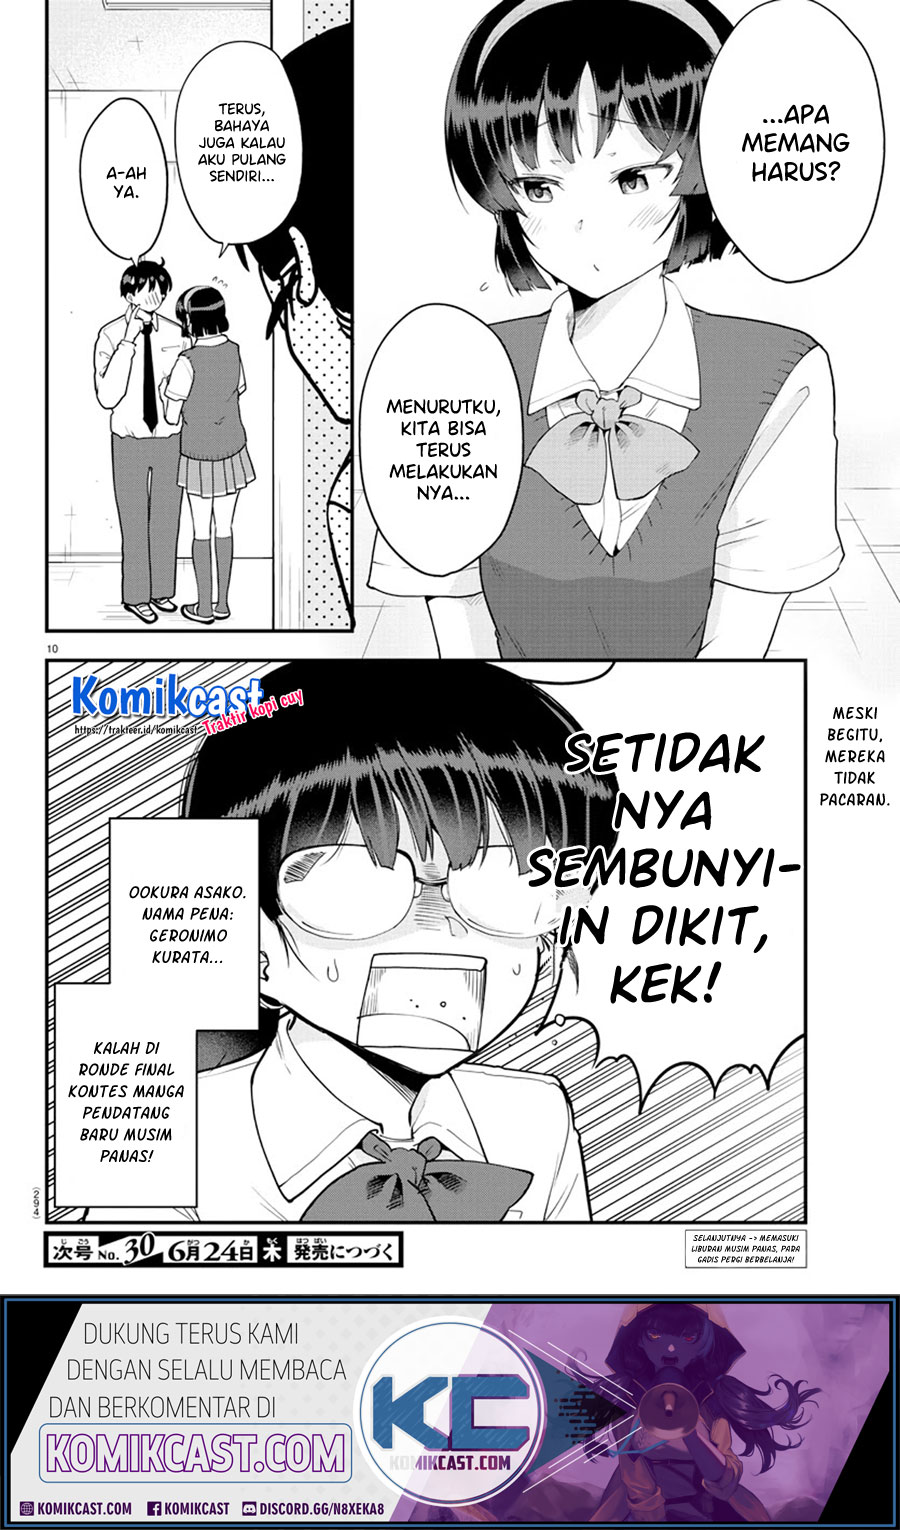 Meika-san Can’t Conceal Her Emotions Chapter 70